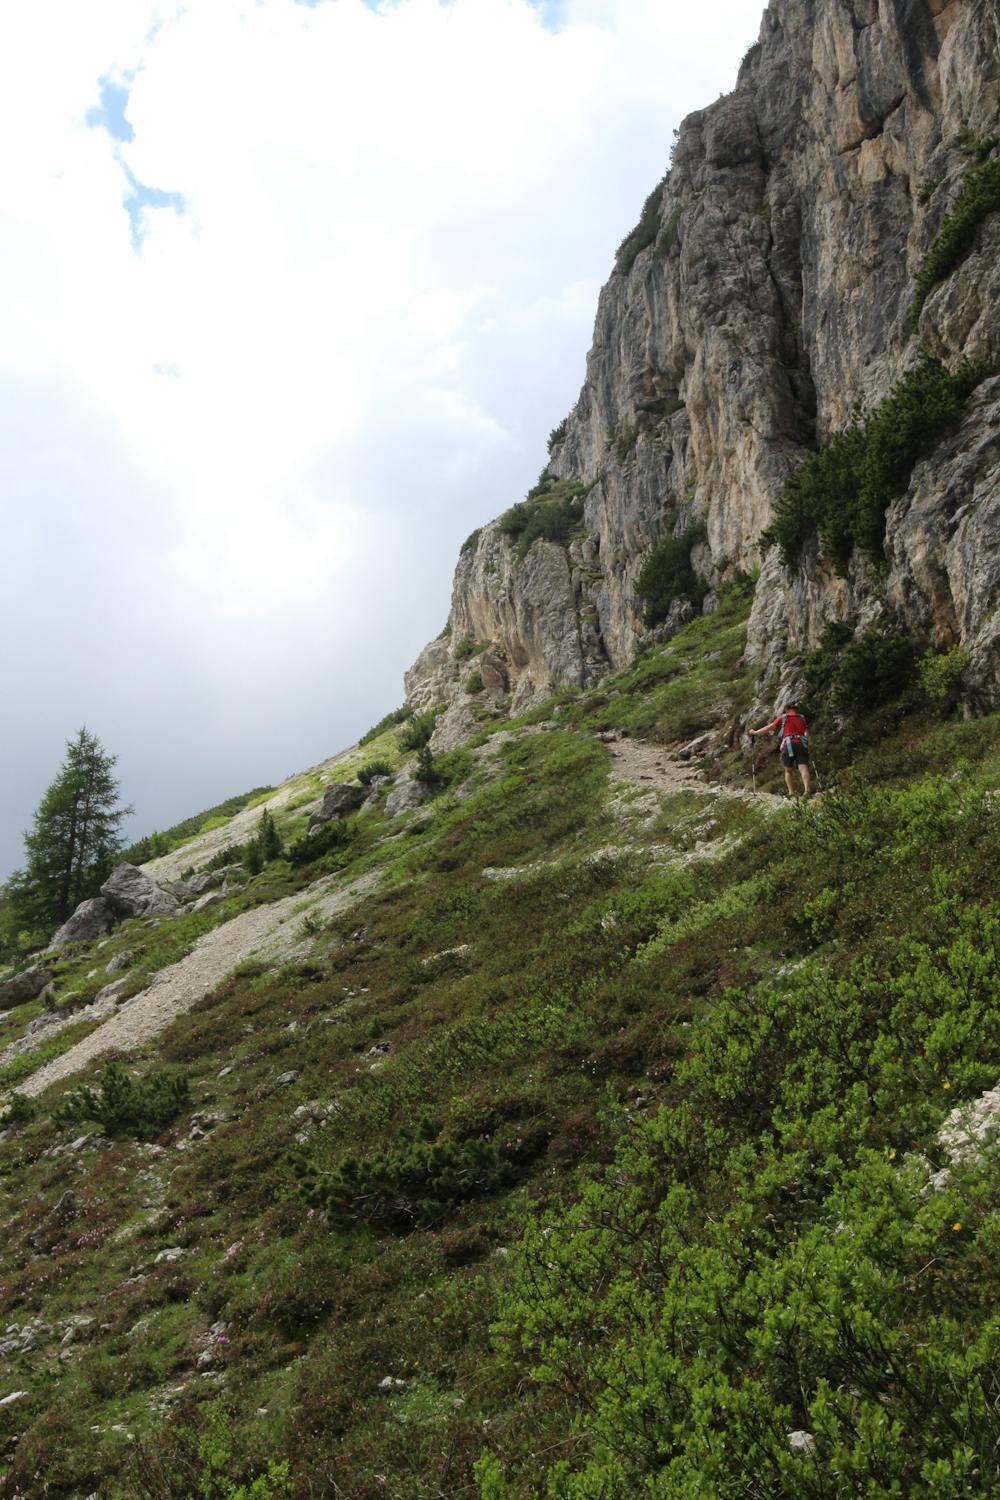 Traversing beneath the steep cliffs of the south-east face